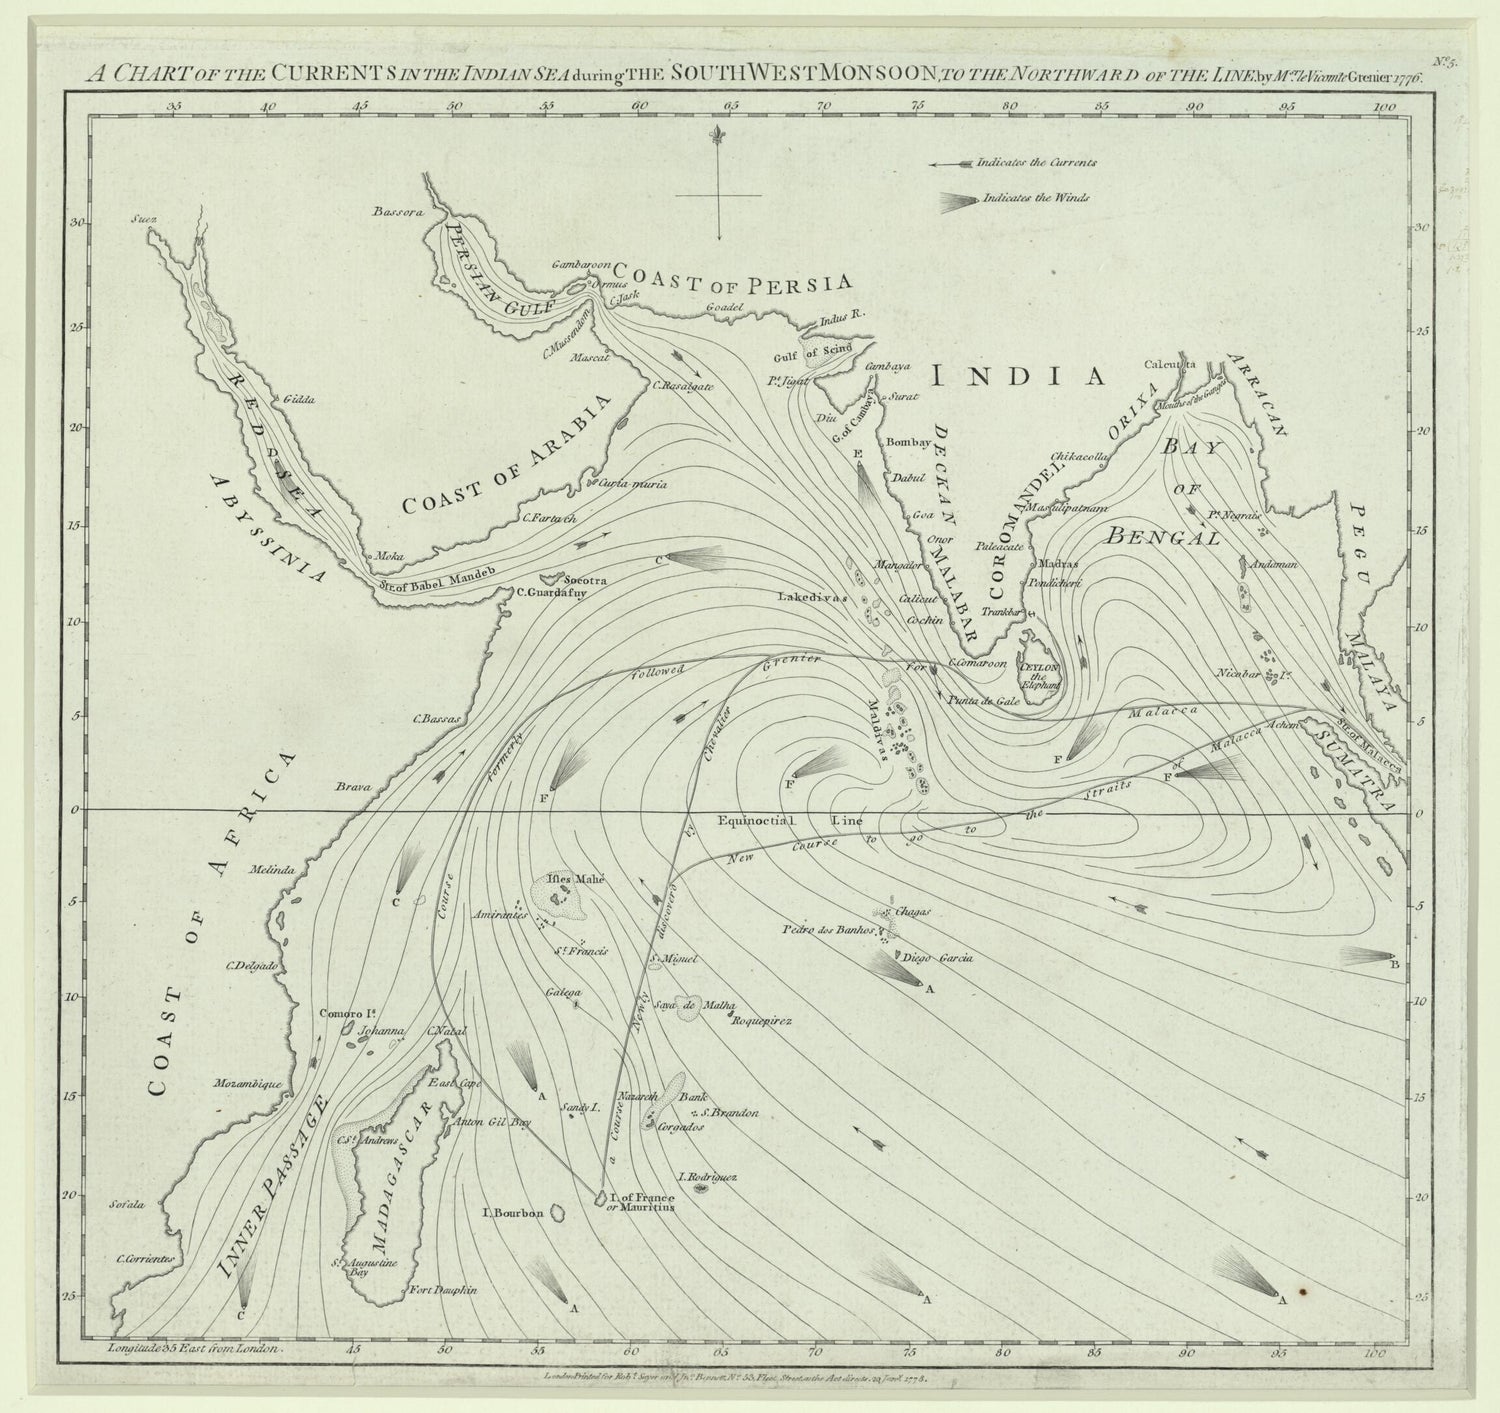 This old map of A Chart of the Currents In the Indian Sea During the Southwest Monsoon, to the Northward of the Line. (A Chart of the Currents In the Indian Sea During the Northeast Monsoon, to the Northward of the Line) from 1778 was created by Vicomte 